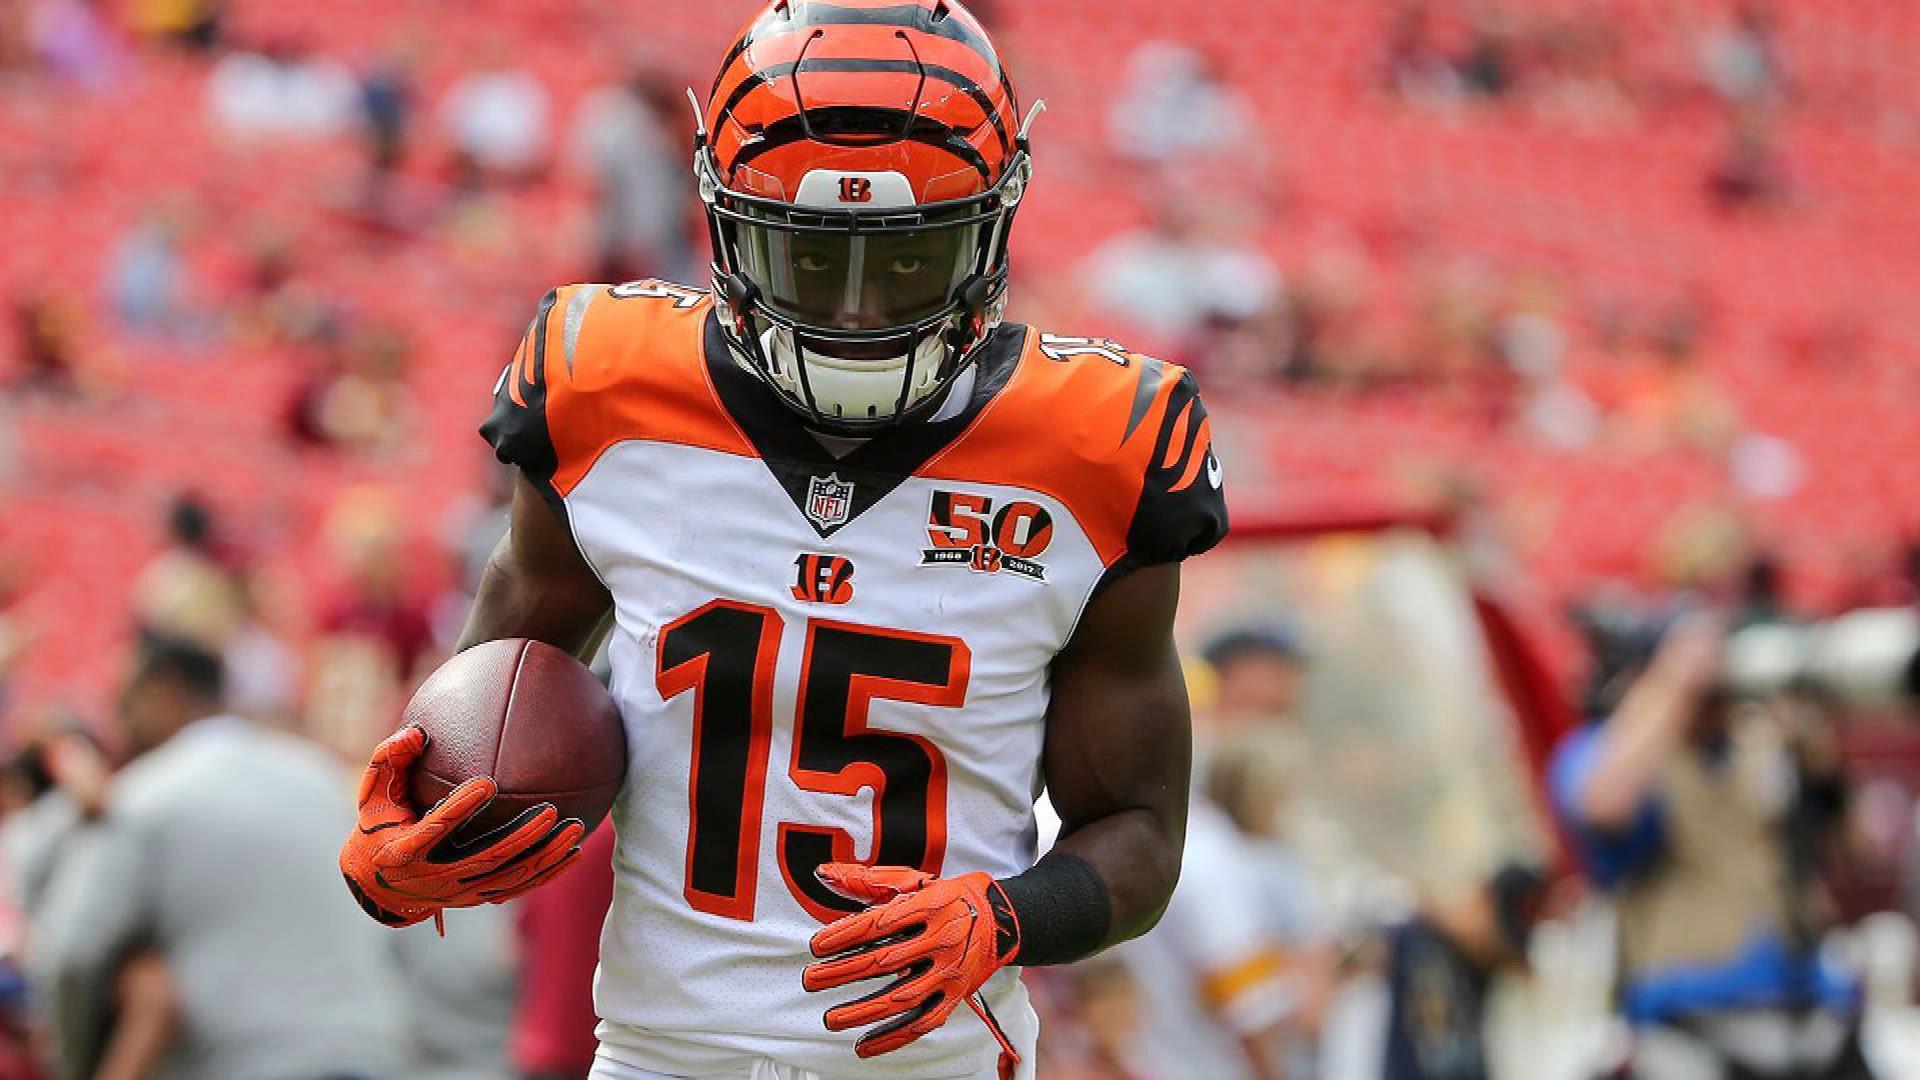 Bengals' John Ross ends horrific rookie year without a catch. NBC